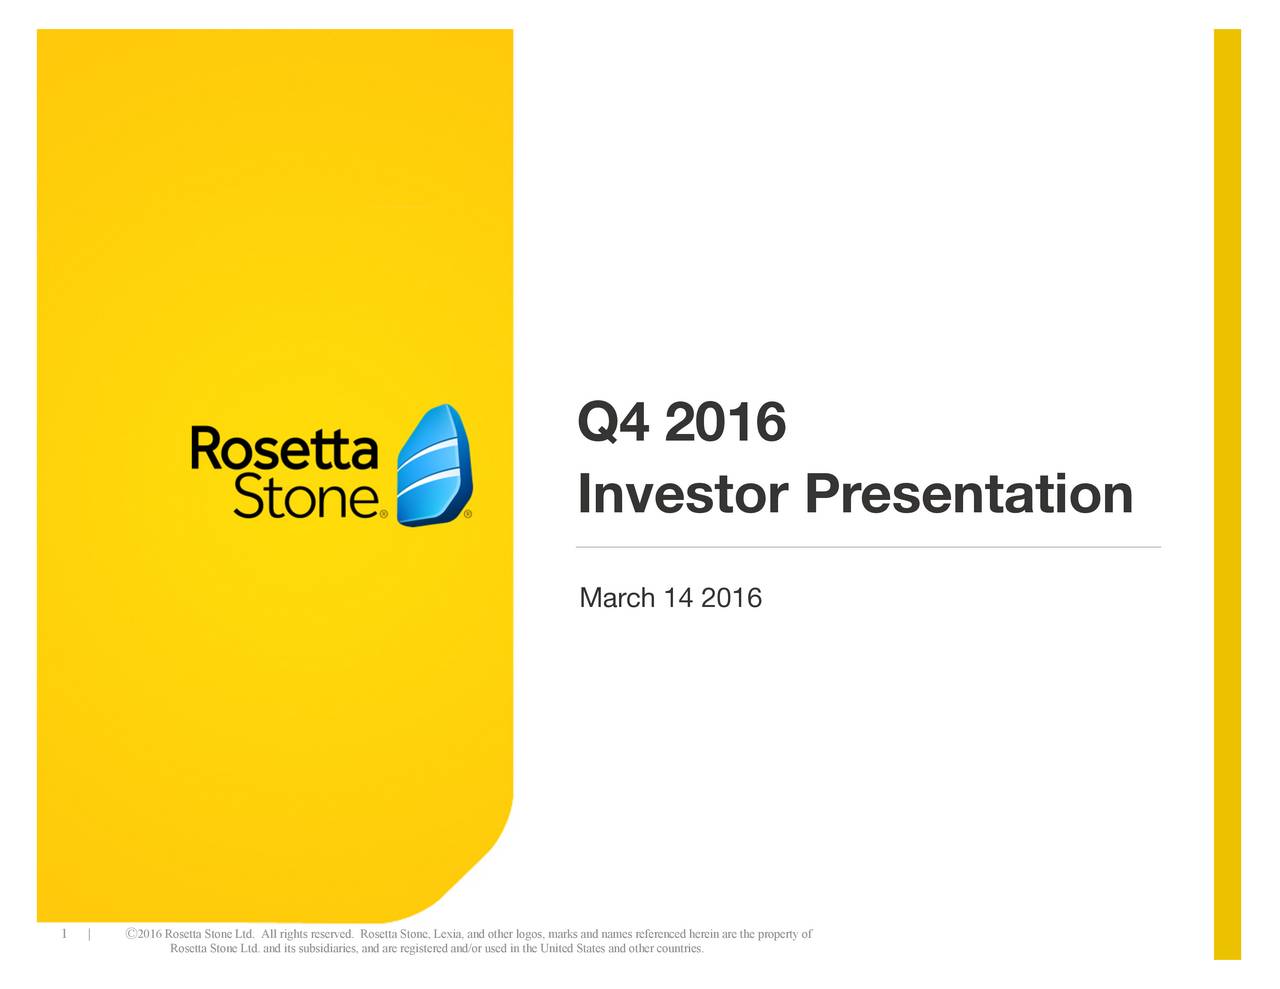 Investor Presentation March 14 2016 1 | 2016 Rosetta Stone Ltd. All rights reserved. Rosetta Stone, Lexia, and other logos, marks and names referenced herein are theproperty of Rosetta Stone Ltd. and its subsidiaries, and are registered and/or used in the United States and other countries.